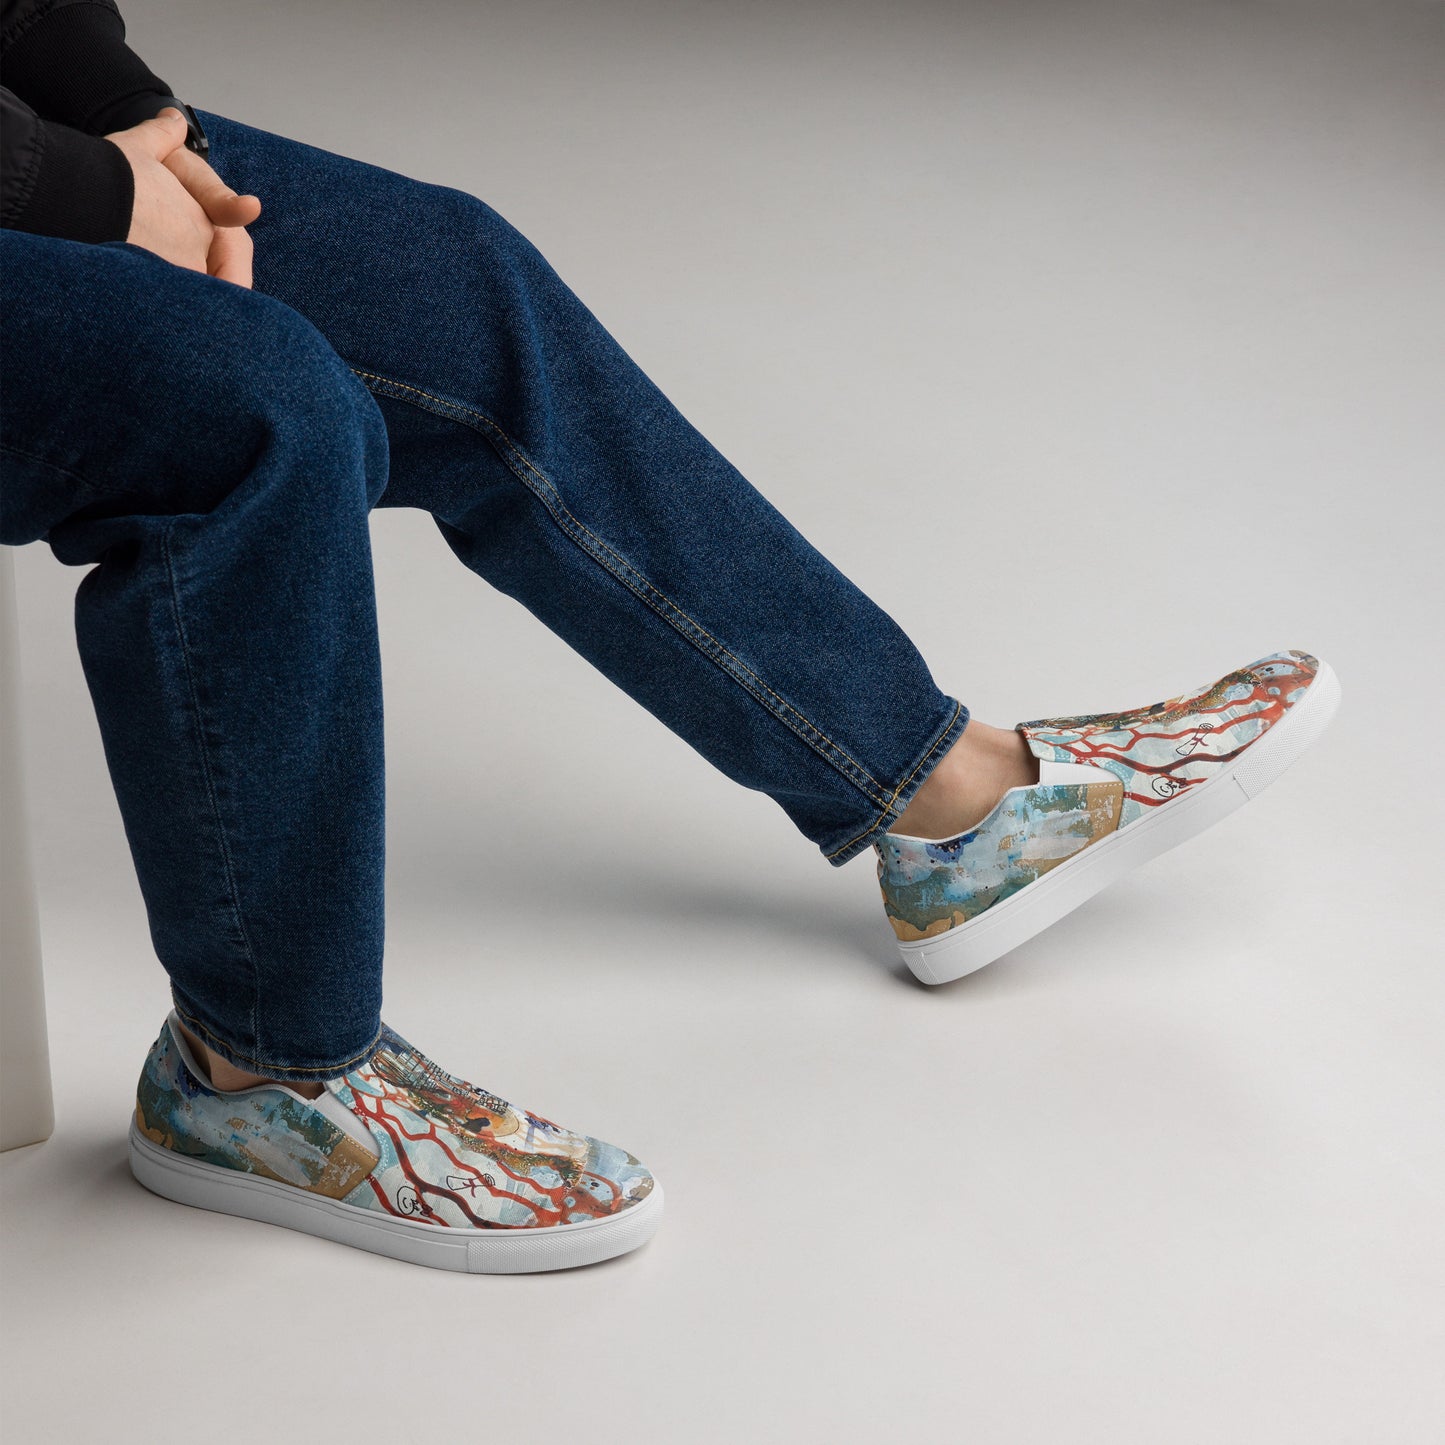 Chaussures slip-on en toile pour hommes - Freedom